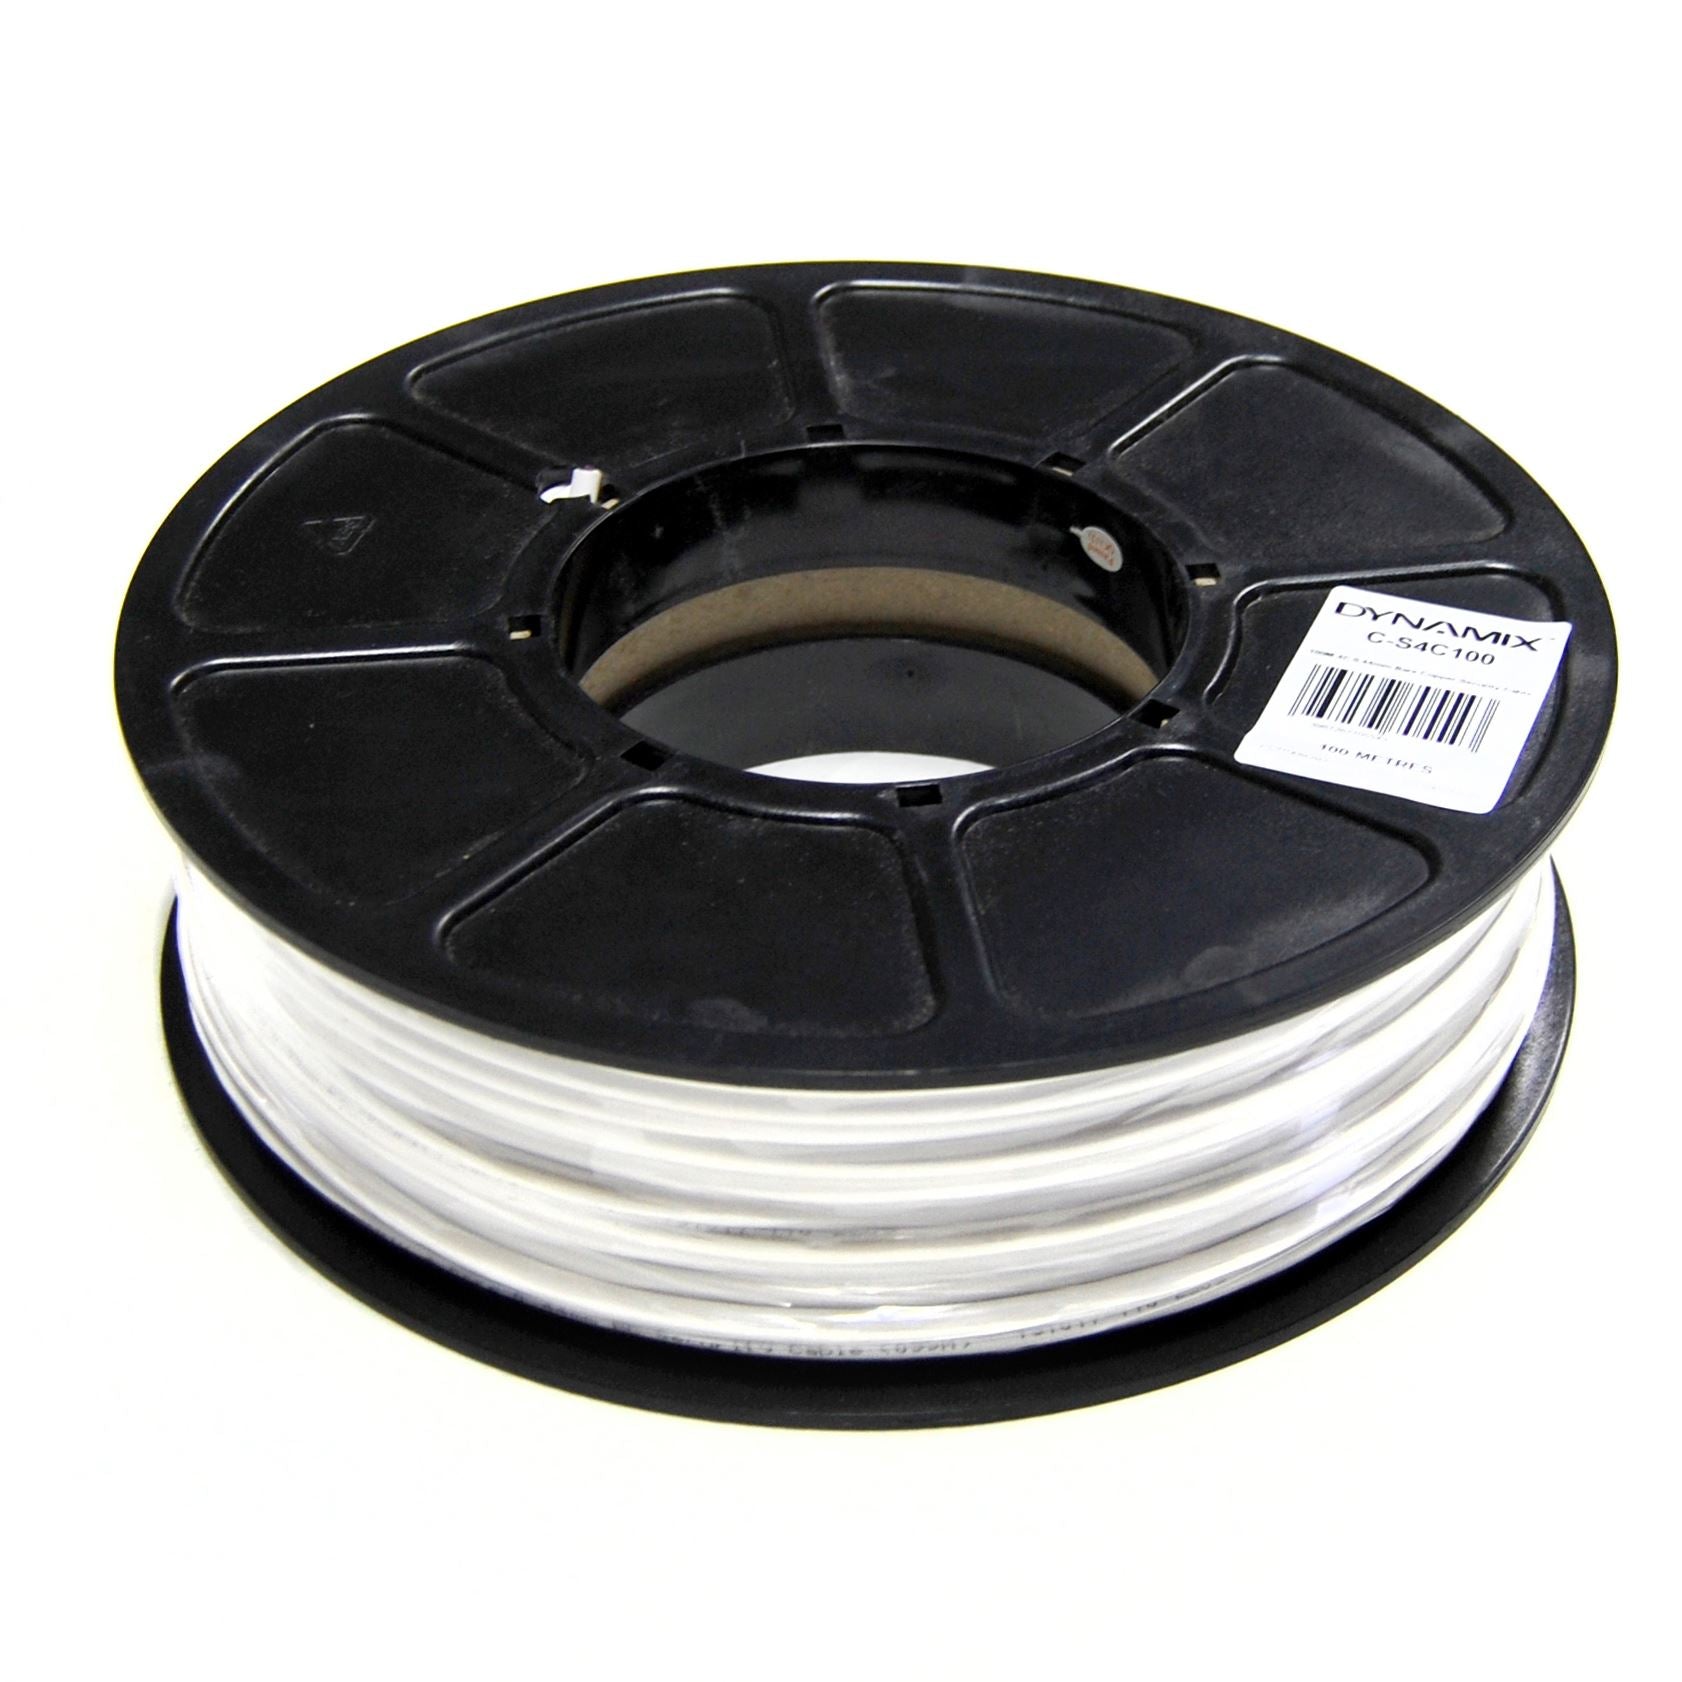 DYNAMIX_100m_4C_0.22mm_Bare_Copper_Security_Cable_Supplied_on_Plastic_Reel